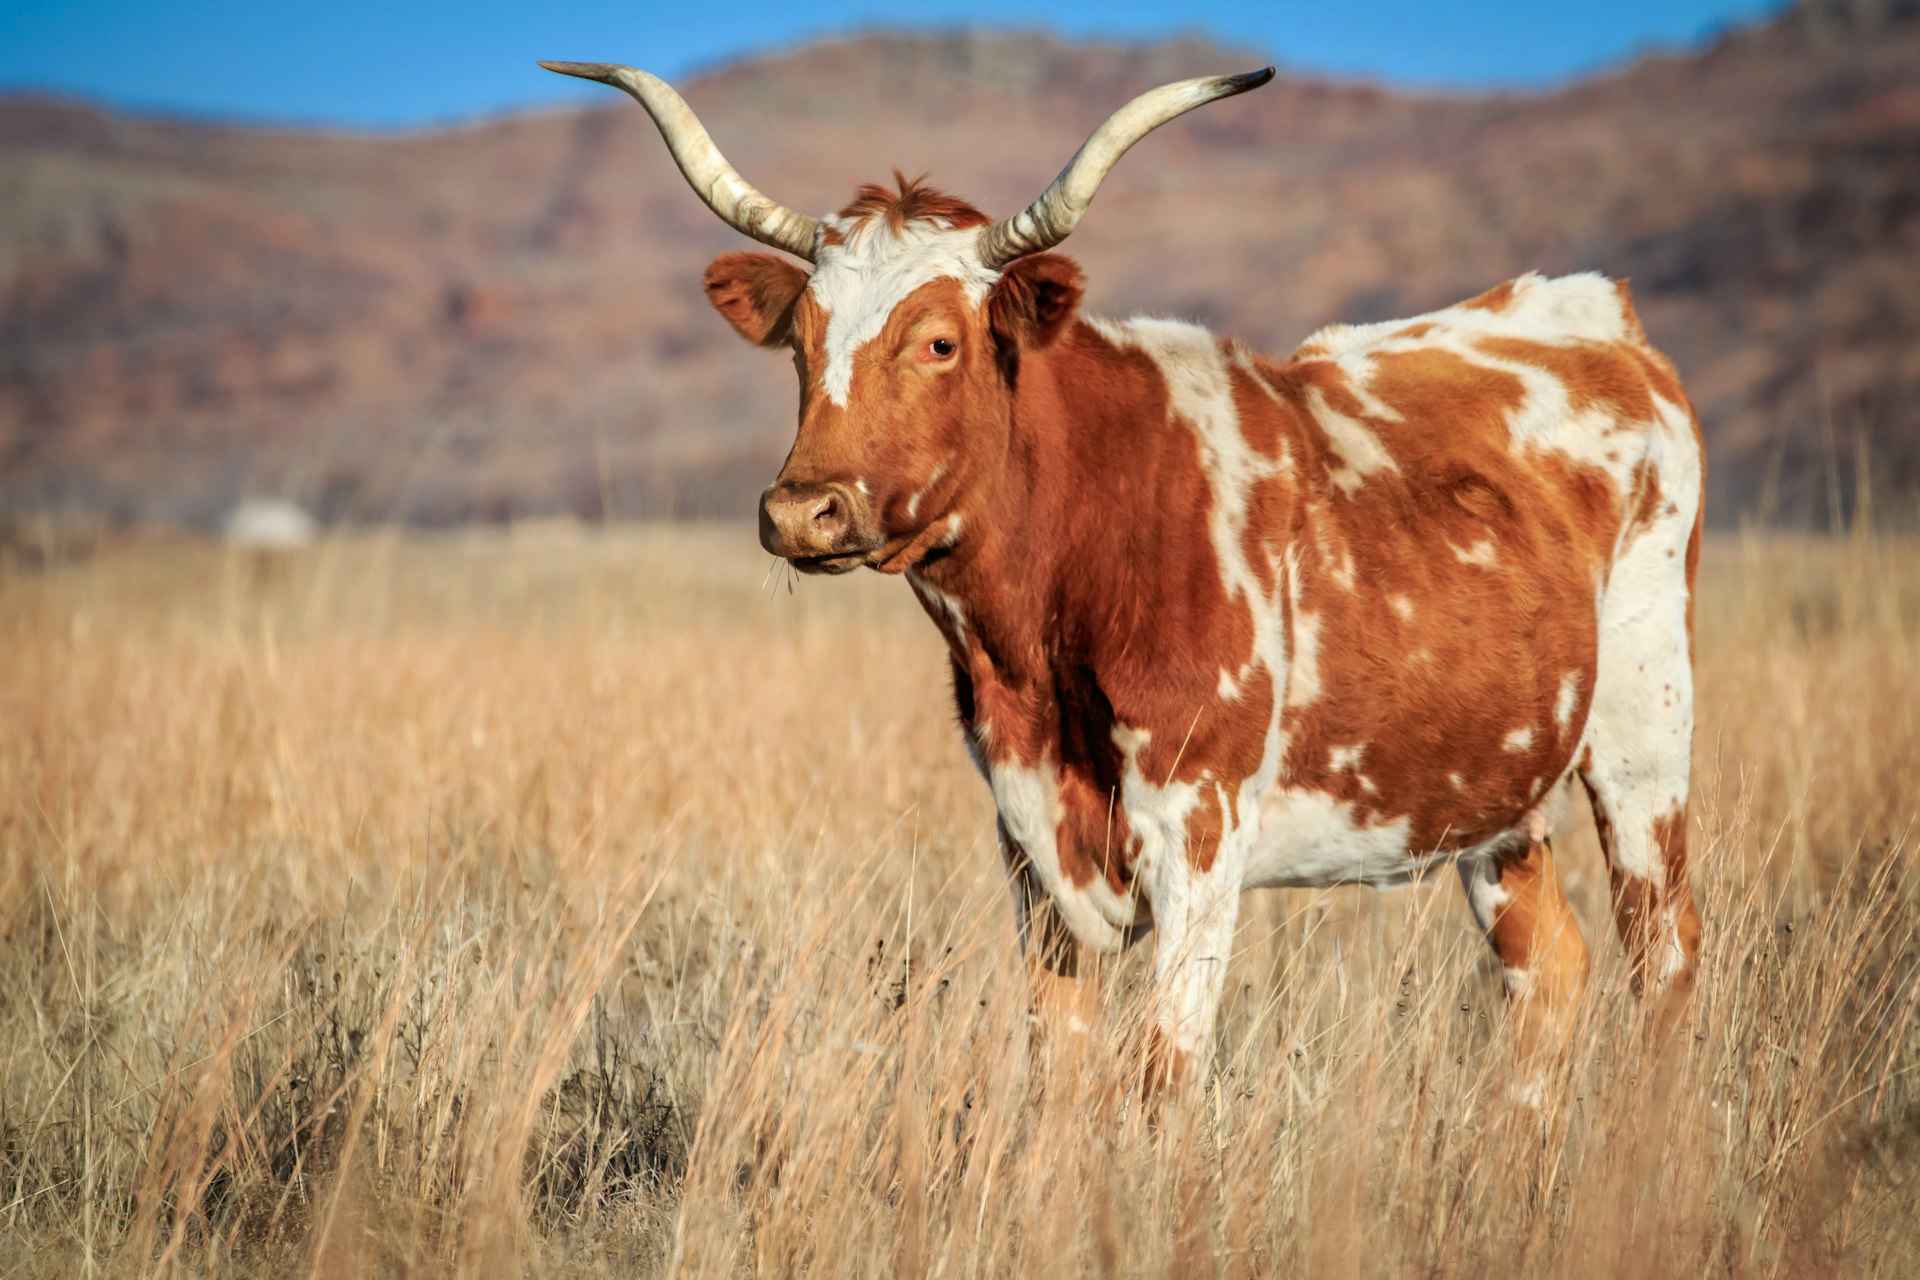 A wild longhorn (Bos taurus) cow on the prairie in the Wichita Mountains Wildlife Refuge in Oklahoma